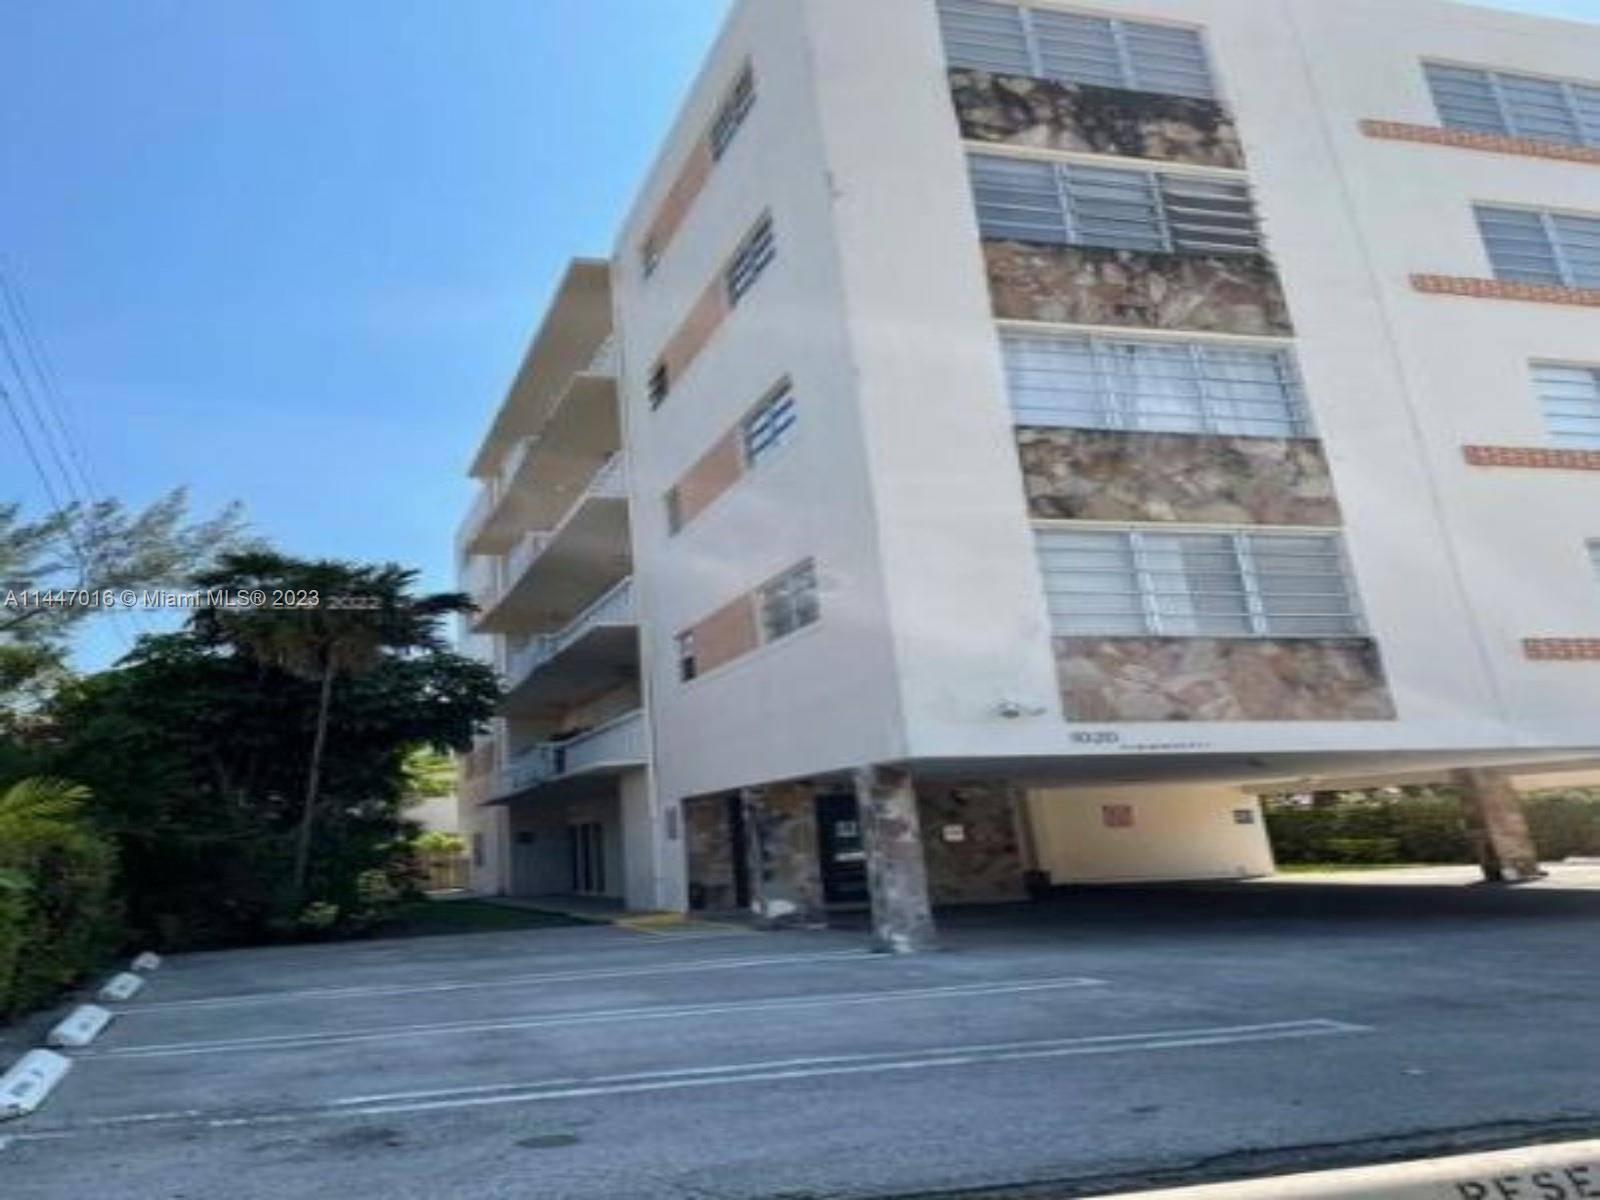 CONDO 2 2 SPACIOUS UNIT, WALK IN CLOSET, UPDATED KITCHEN, 1 ASSIGNED PARKING, EXTRA STORAGE SPACE, ONLY 12 EXCLUSIVE RESIDENCE, GATED POOL ; BAY HARBOR ISLANDS, STEPS AWAY FROM SANDY ...